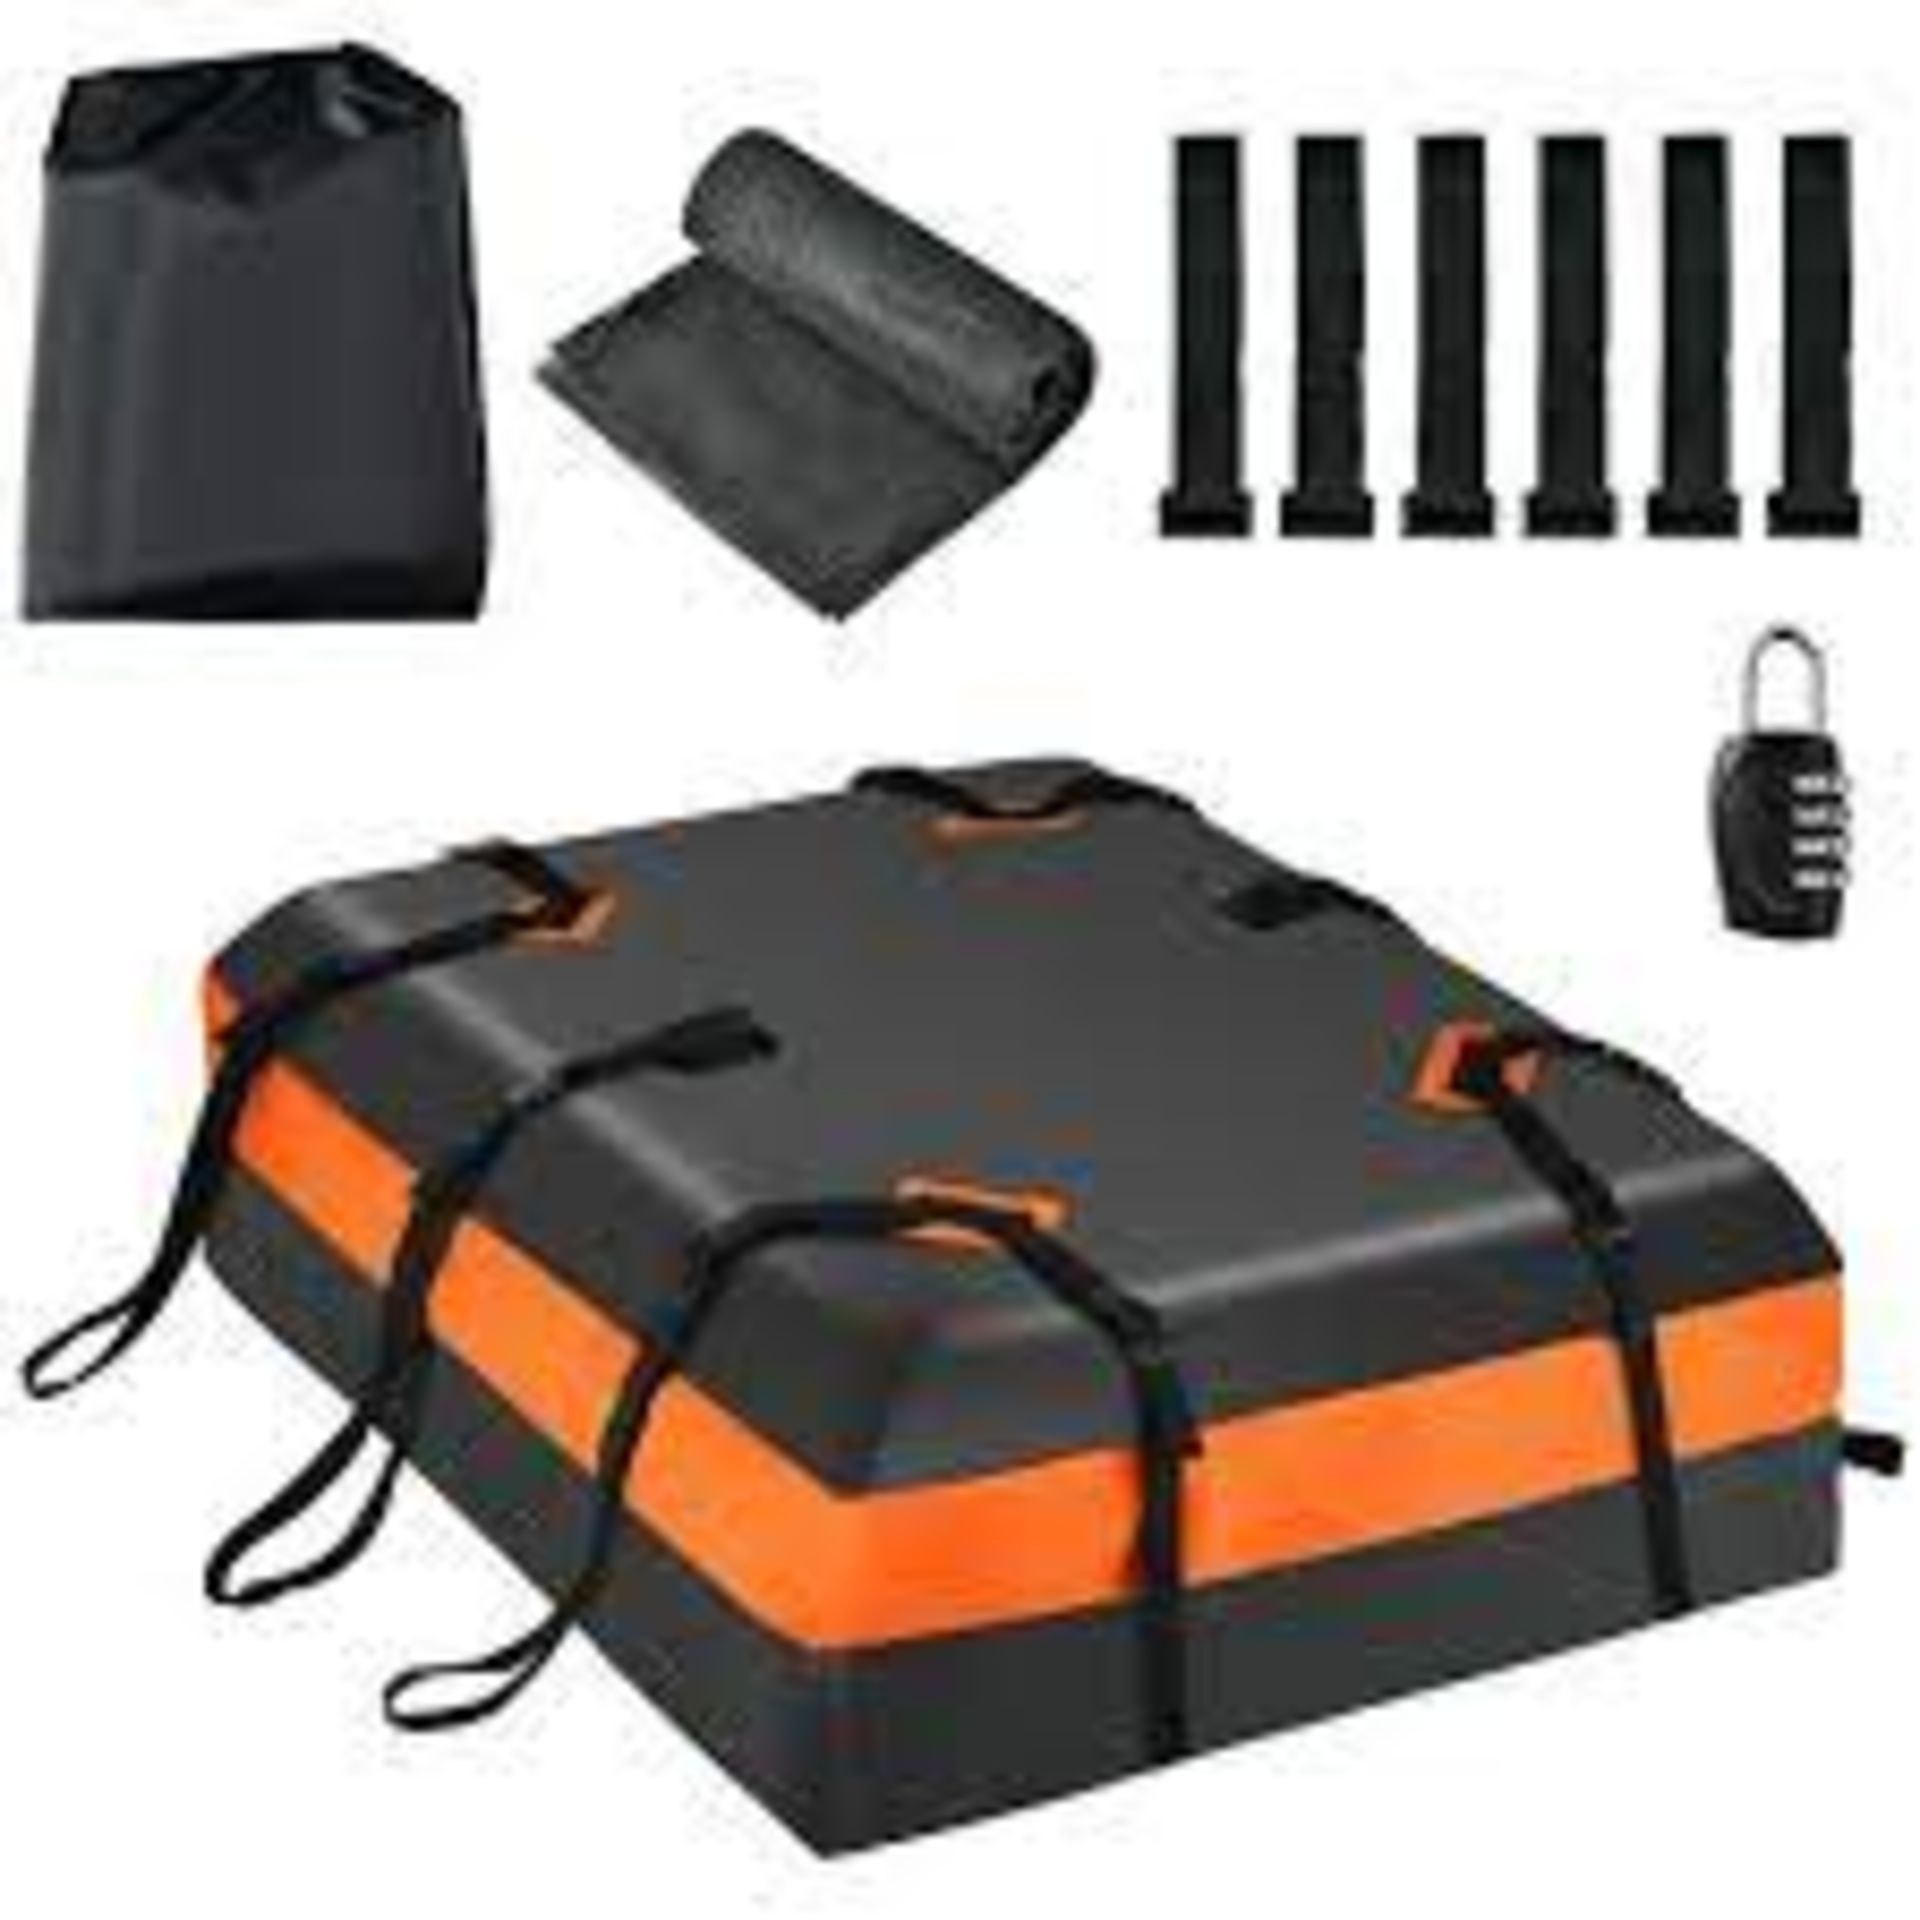 Goplus 15 Cubic Feet Car Roof Bag Rooftop Cargo Carrier Waterproof Luggage Bag with Lock. - PW. Made